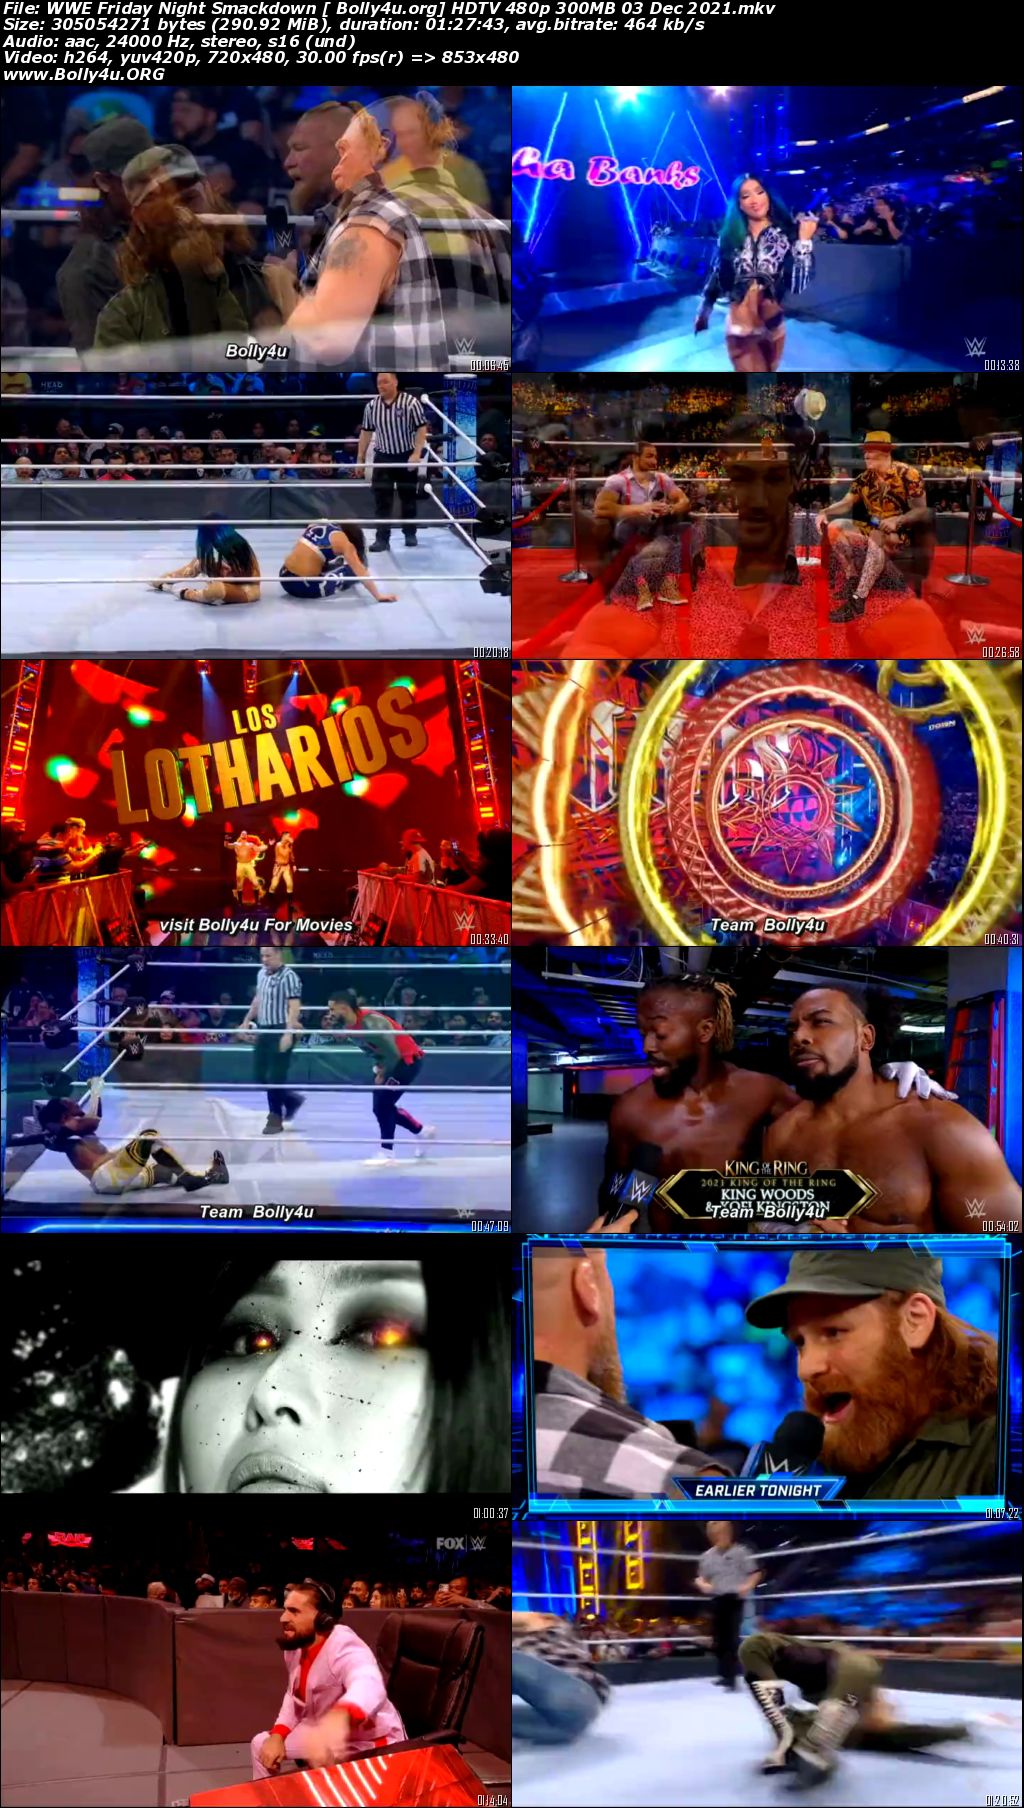 WWE Friday Night Smackdown HDTV 480p 300MB 03 Dec 2021 Download